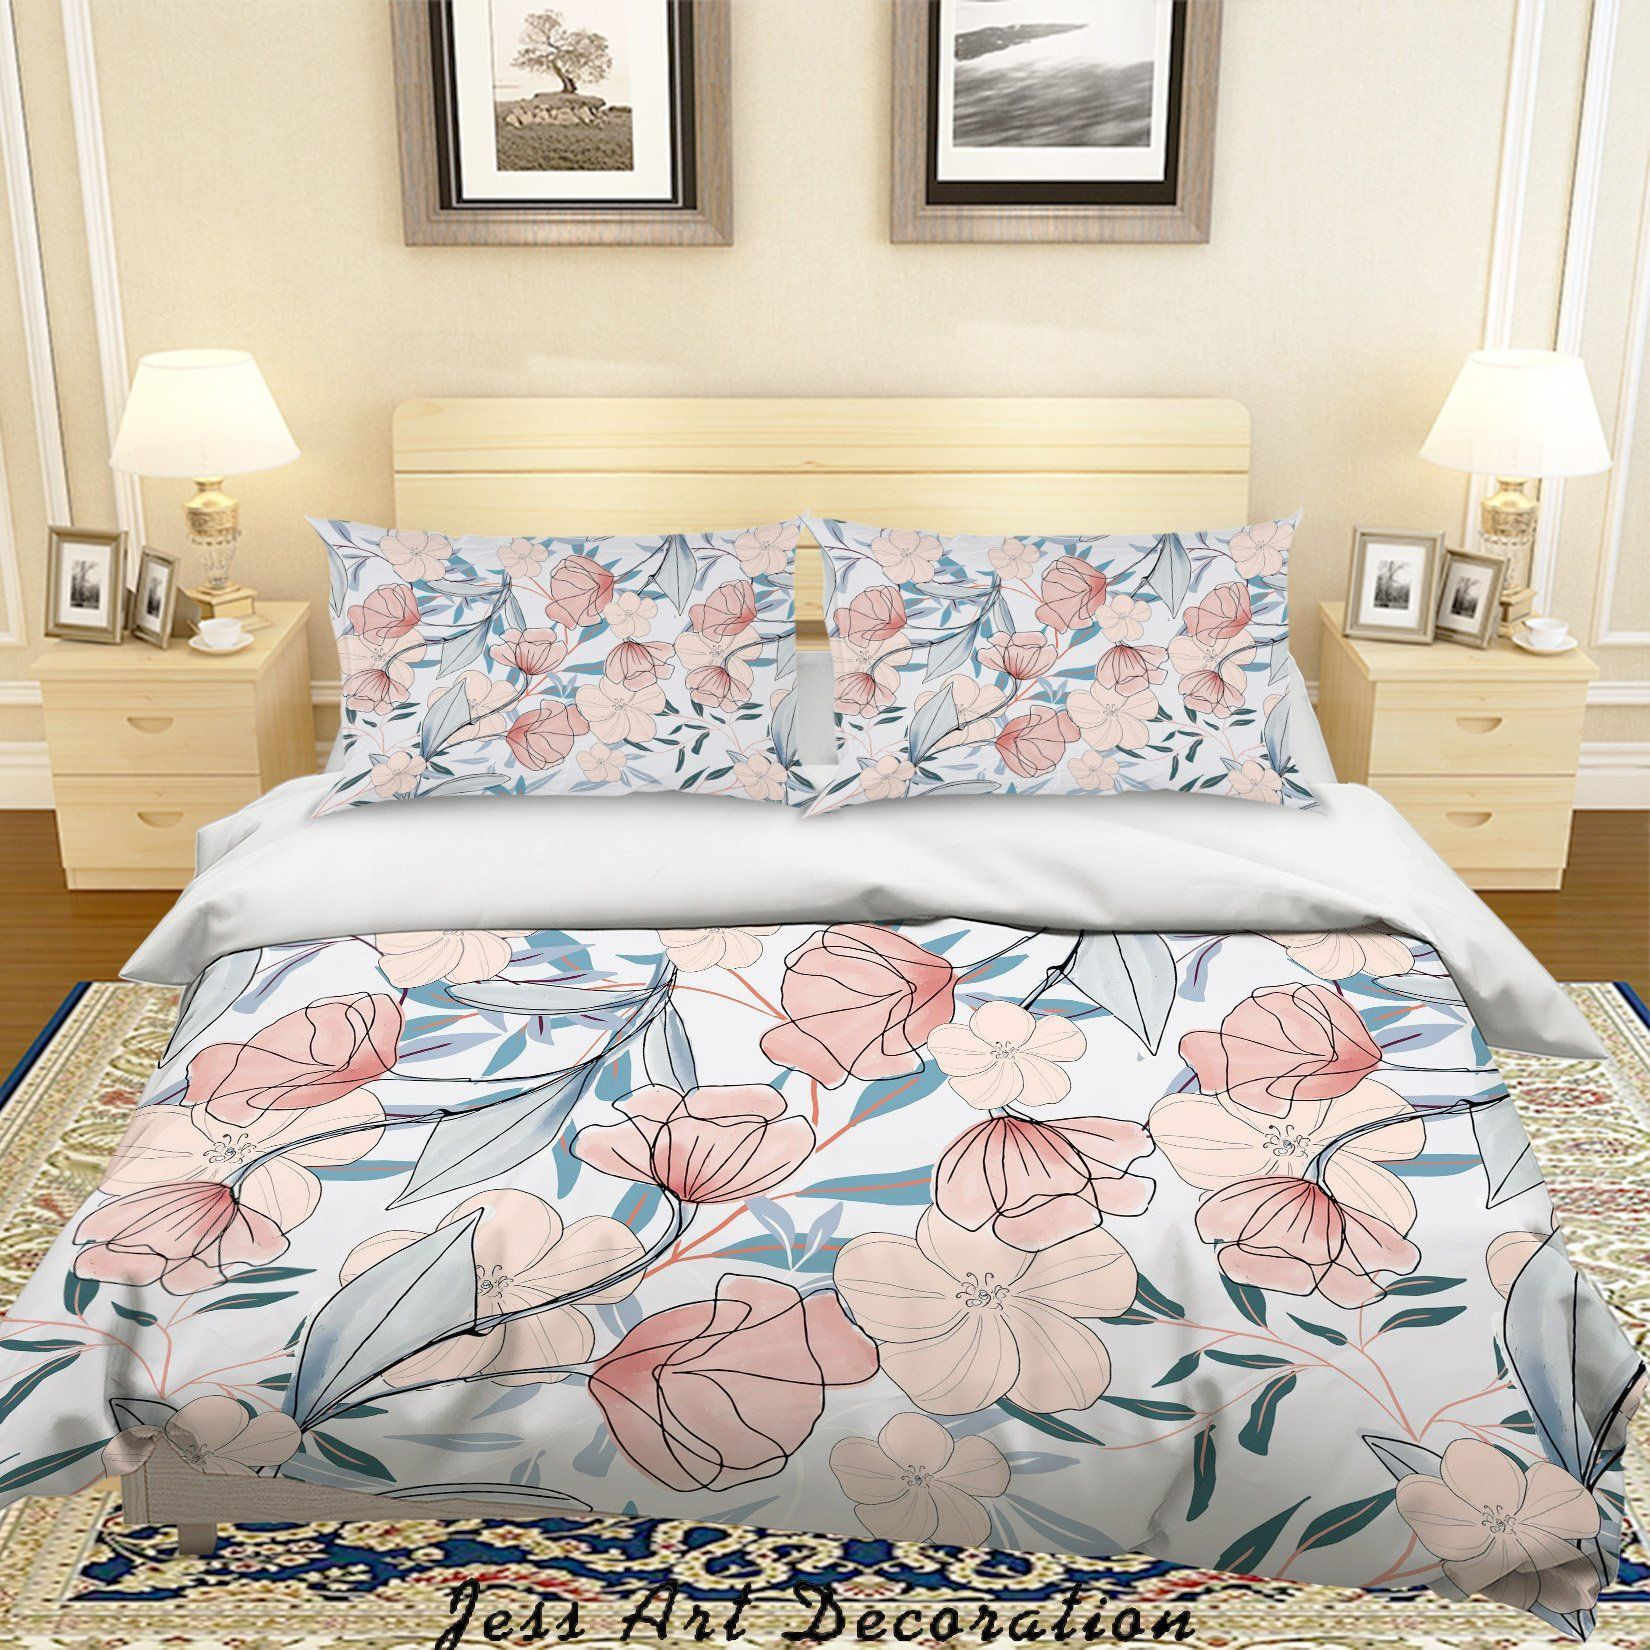 floral print sheet set duvet cover bedding collection perfect presents for birthdays holidays 1xkvv